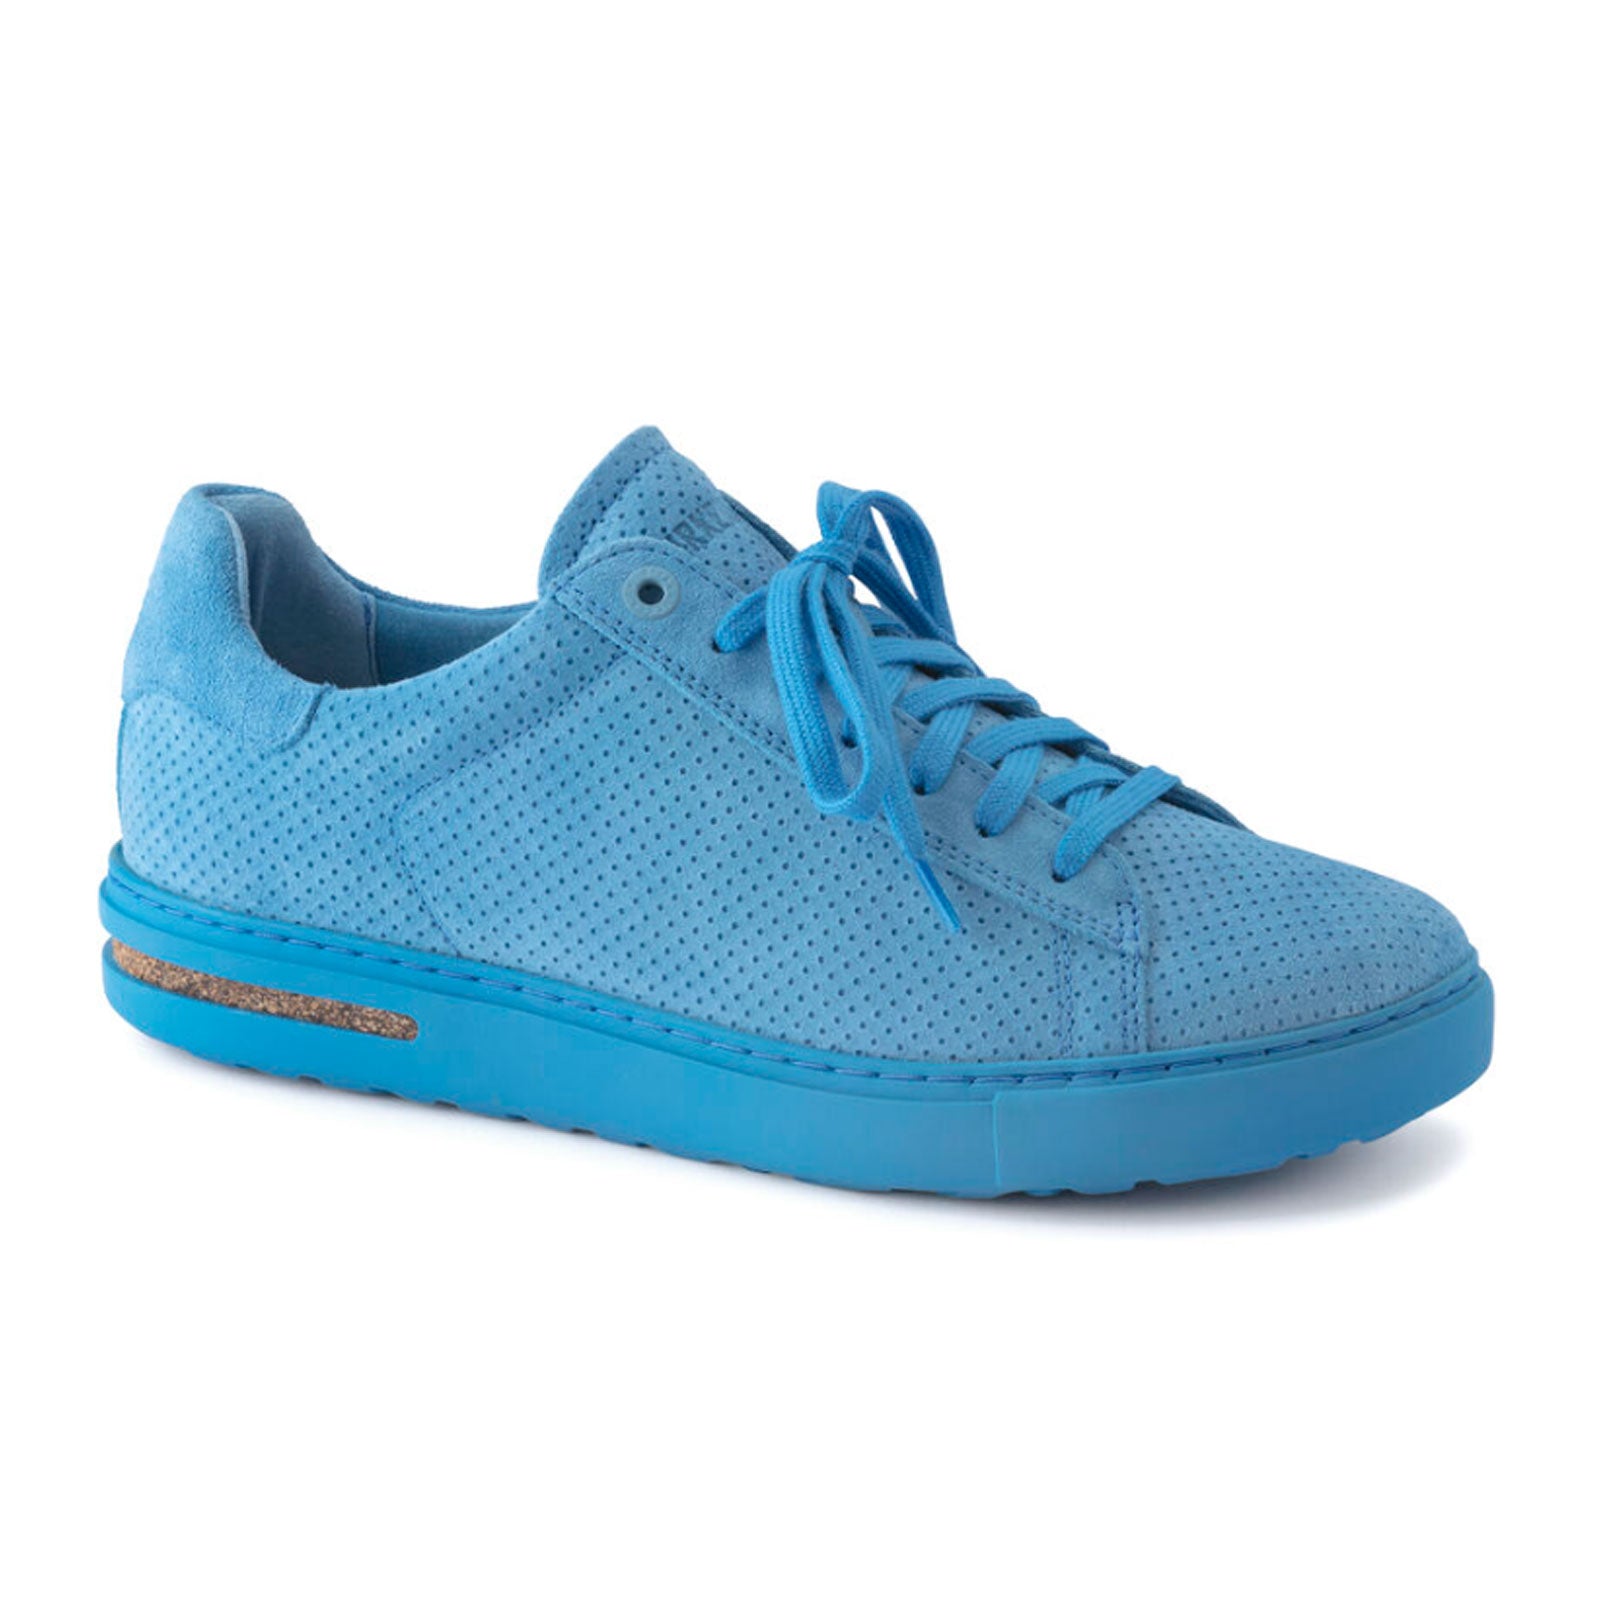 Grenson Hi-Top Blue Sneakers Suede Limited Edition | Blue sneakers, Sneakers,  Womens sneakers